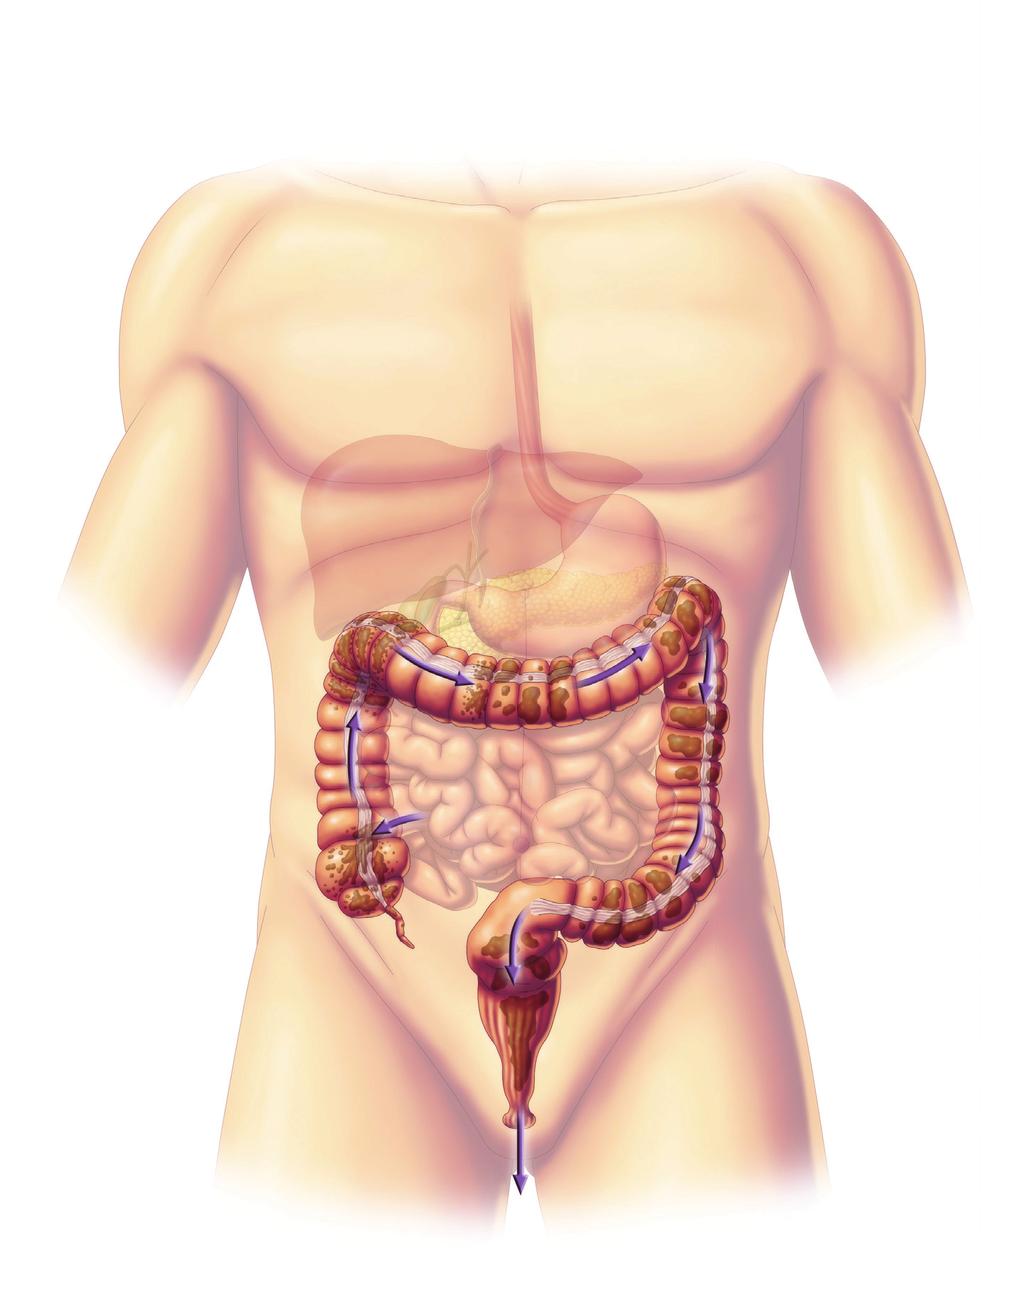 Identify the basic structures and functions of the digestive system Elimination of Waste: The Final Process We have seen how our digestive system converts food into nutrients, but what happens to the